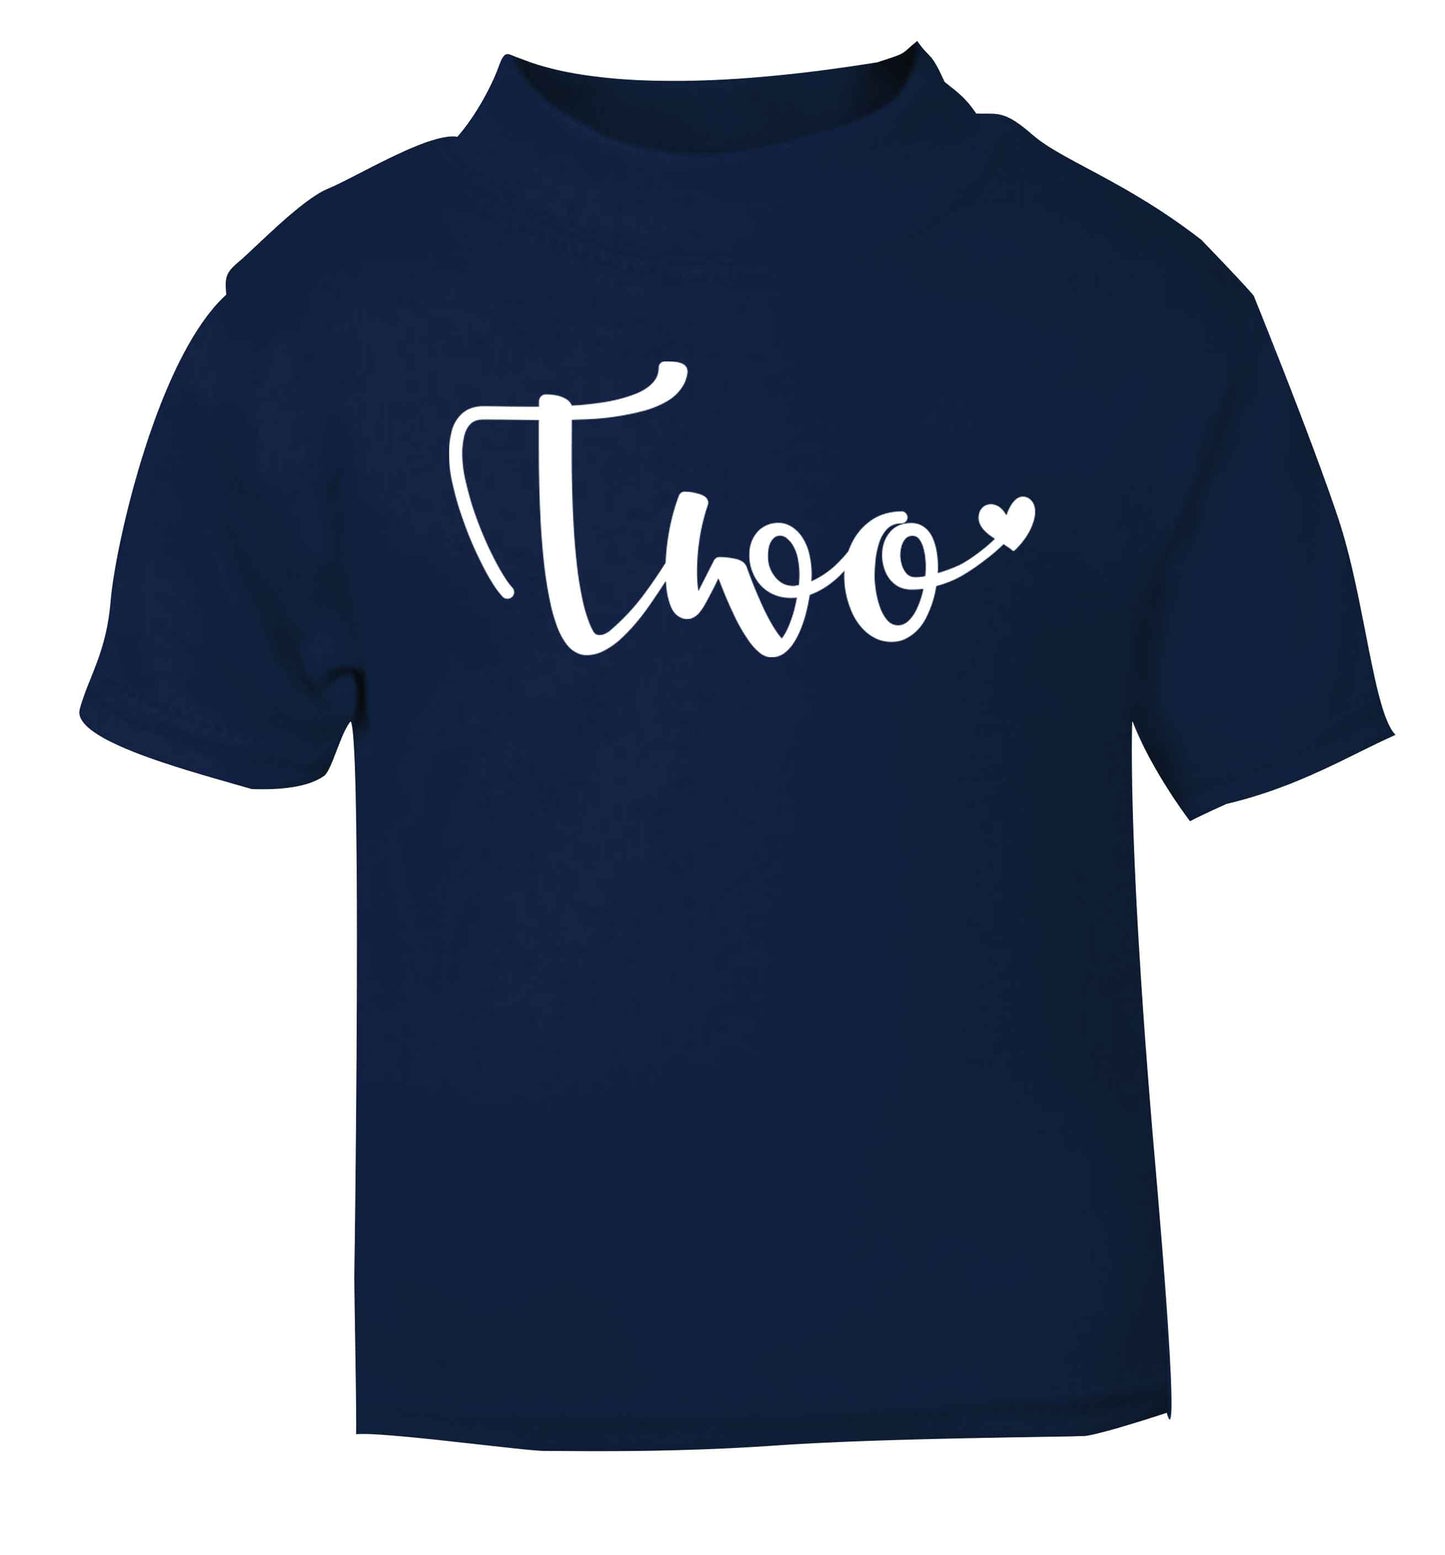 Two and Heart navy baby toddler Tshirt 2 Years